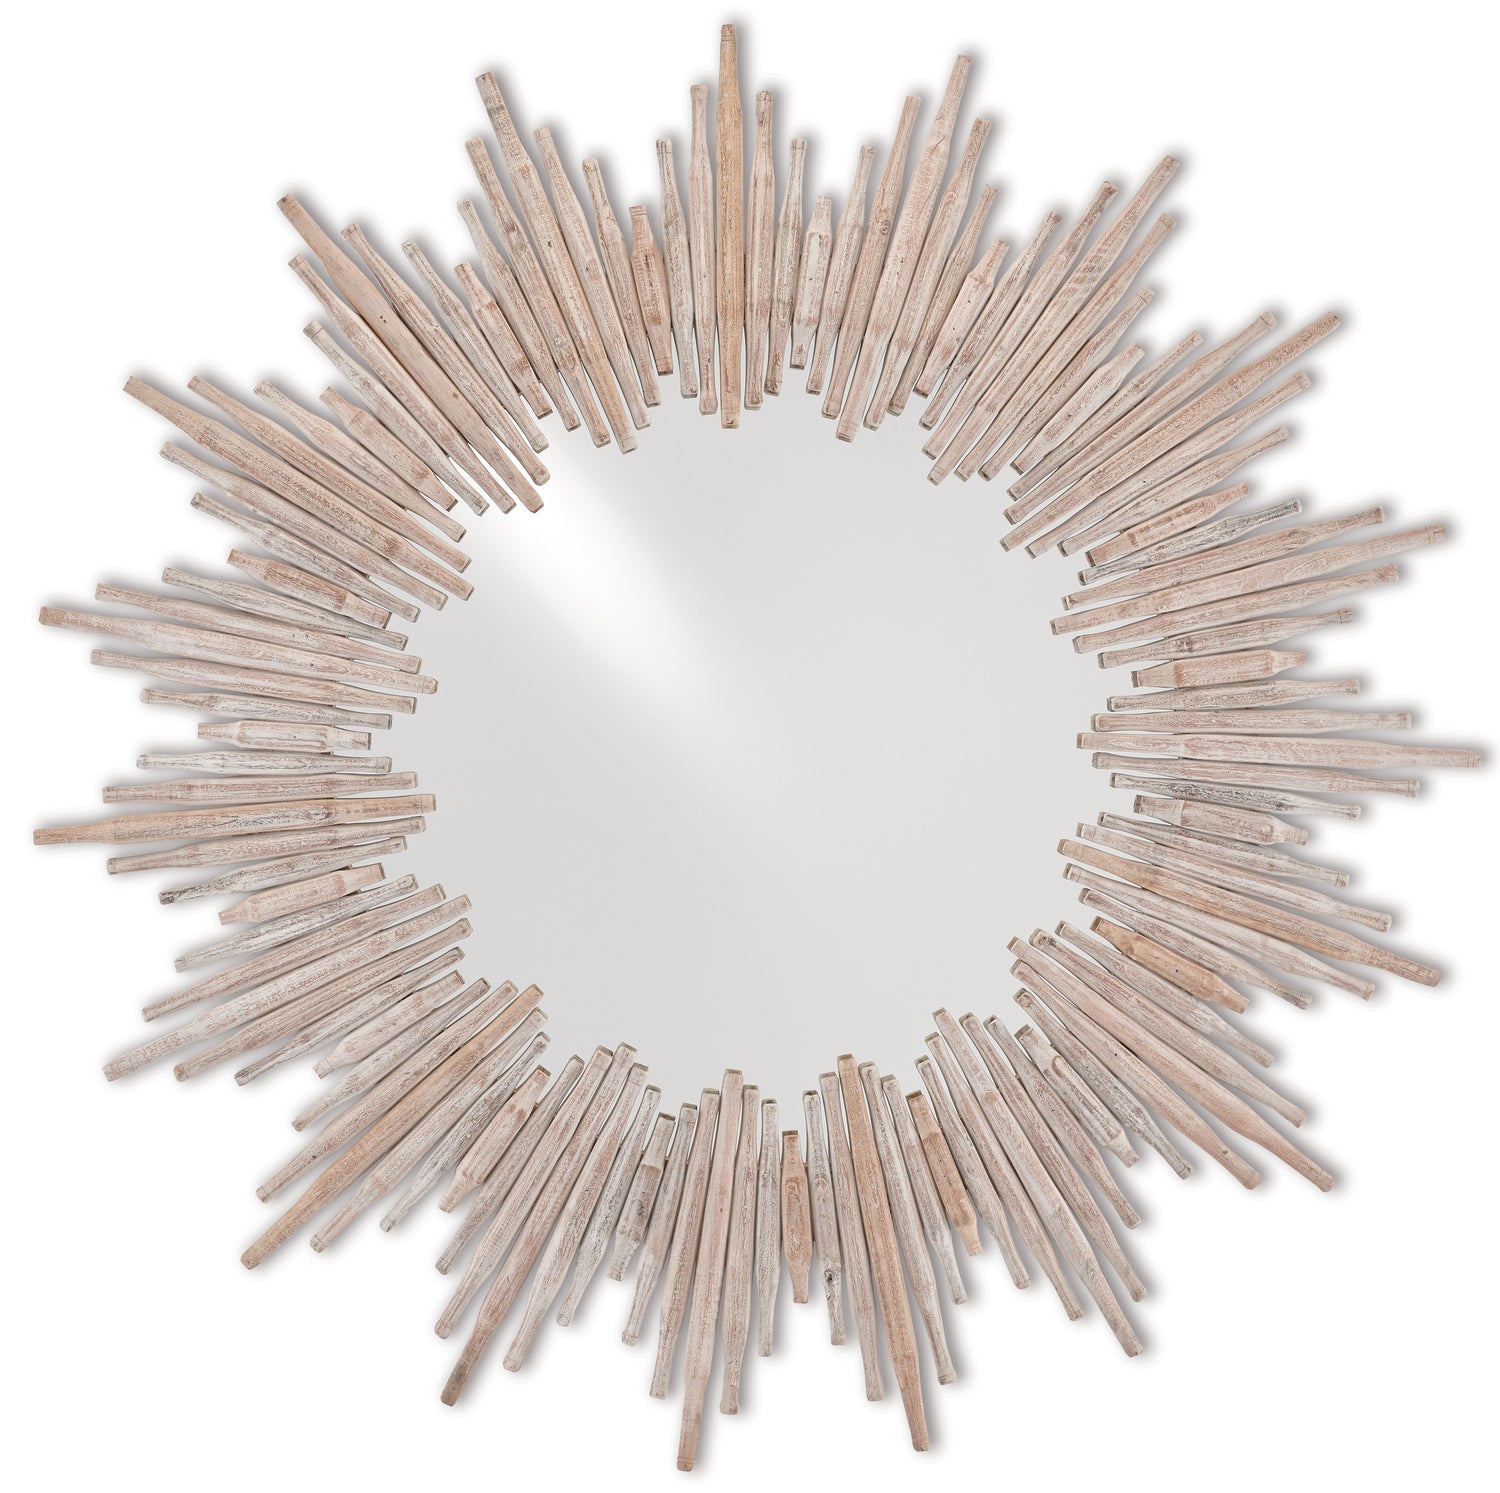 Mirror from the Chadee collection in Whitewash/Mirror finish